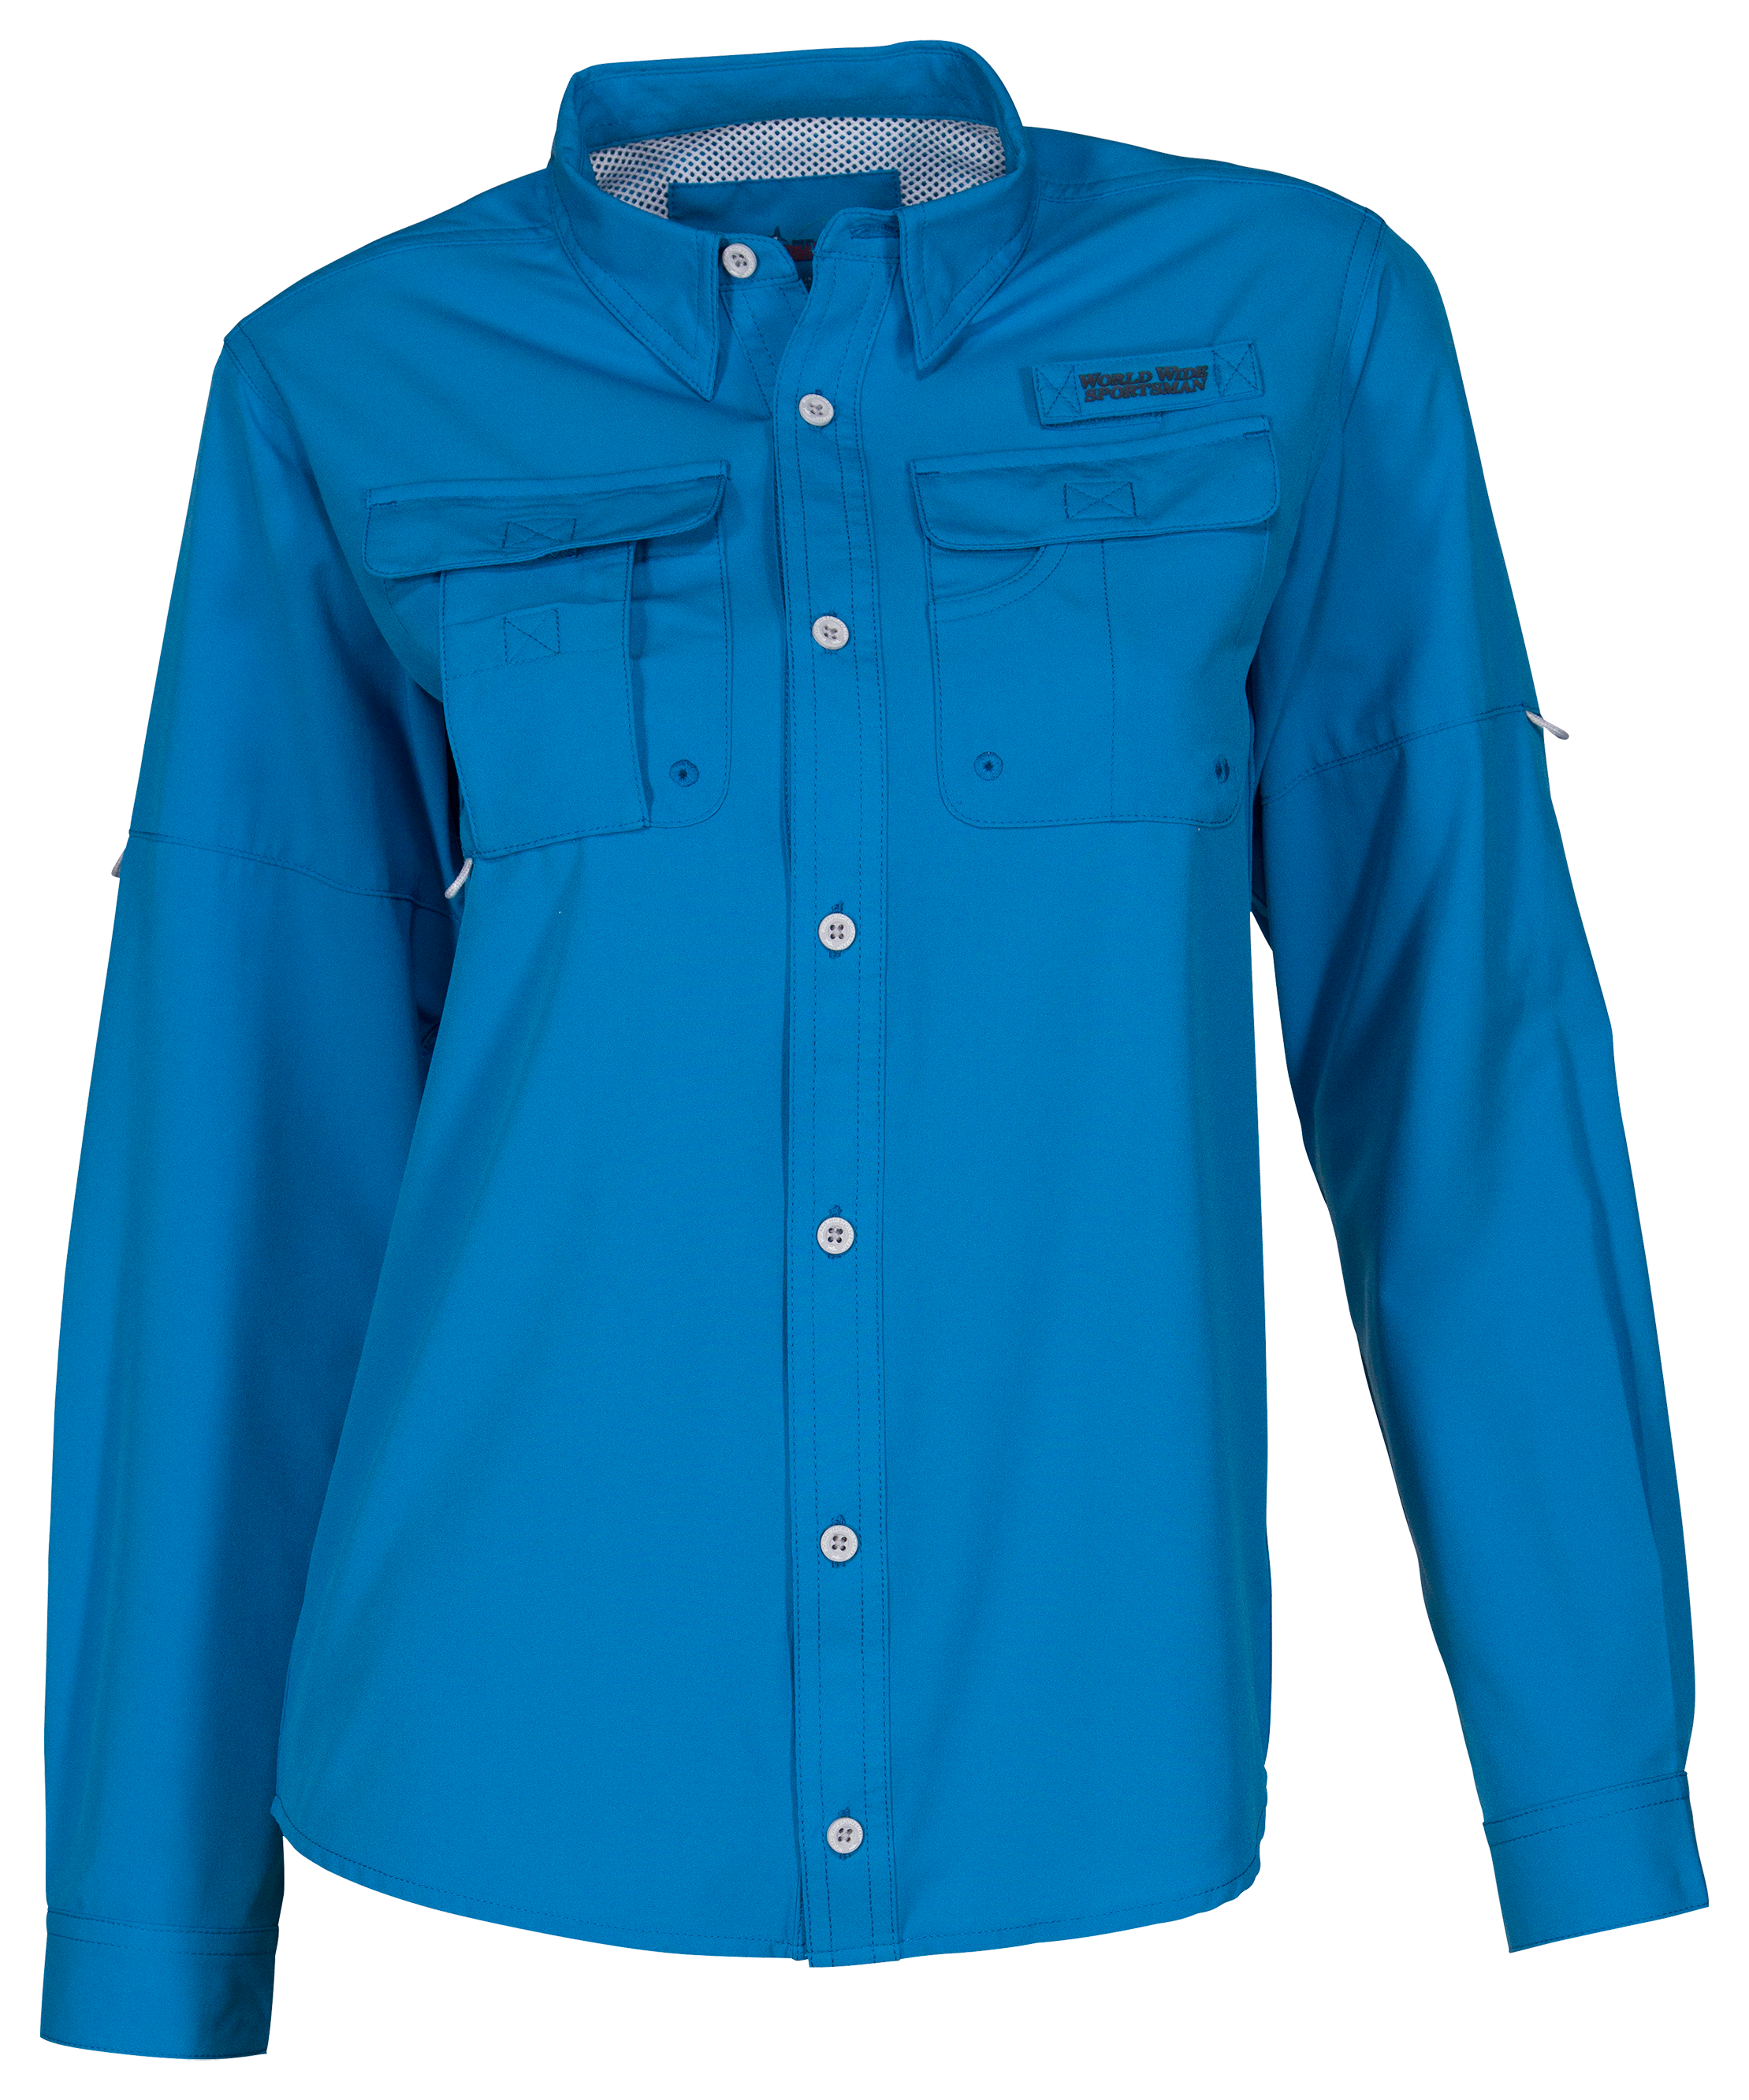 World Wide Sportsman Angler Woven Long-Sleeve Button-Down Fishing